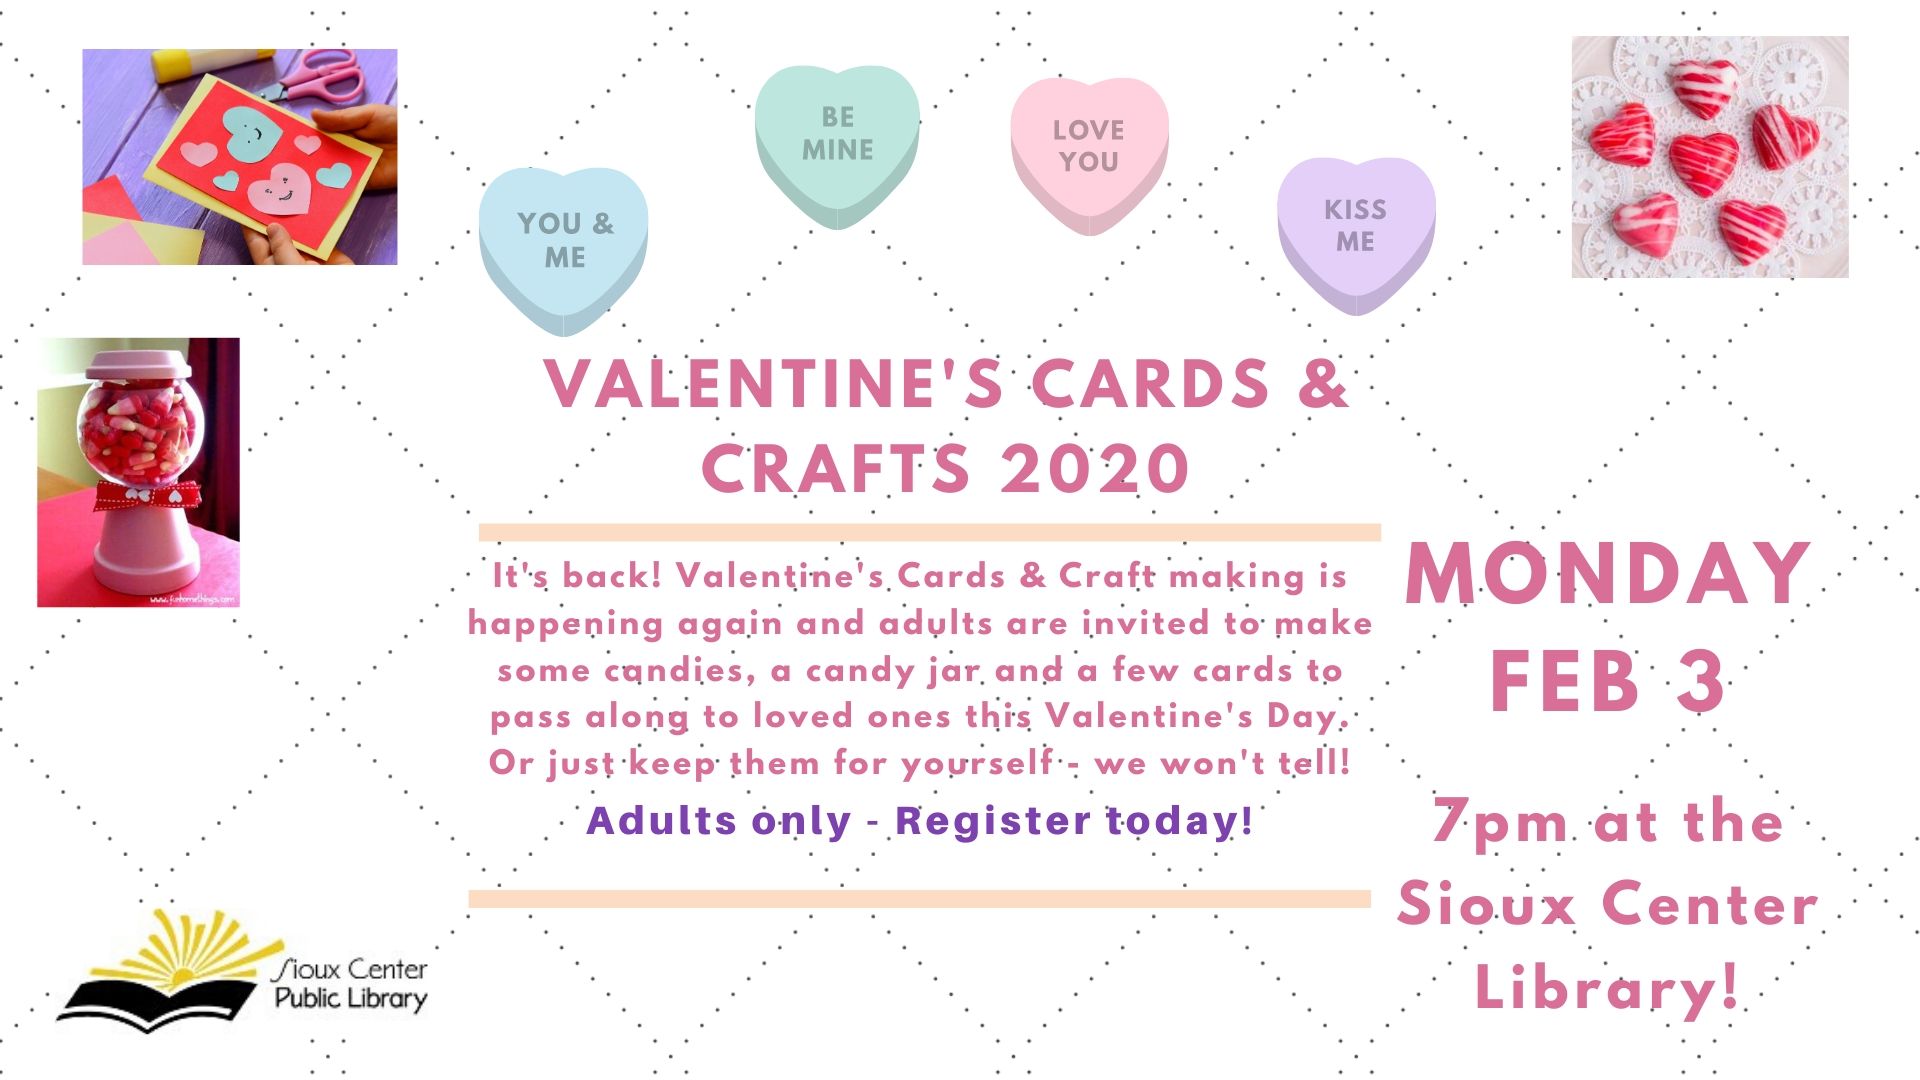 Valentine's Cards and Crafts